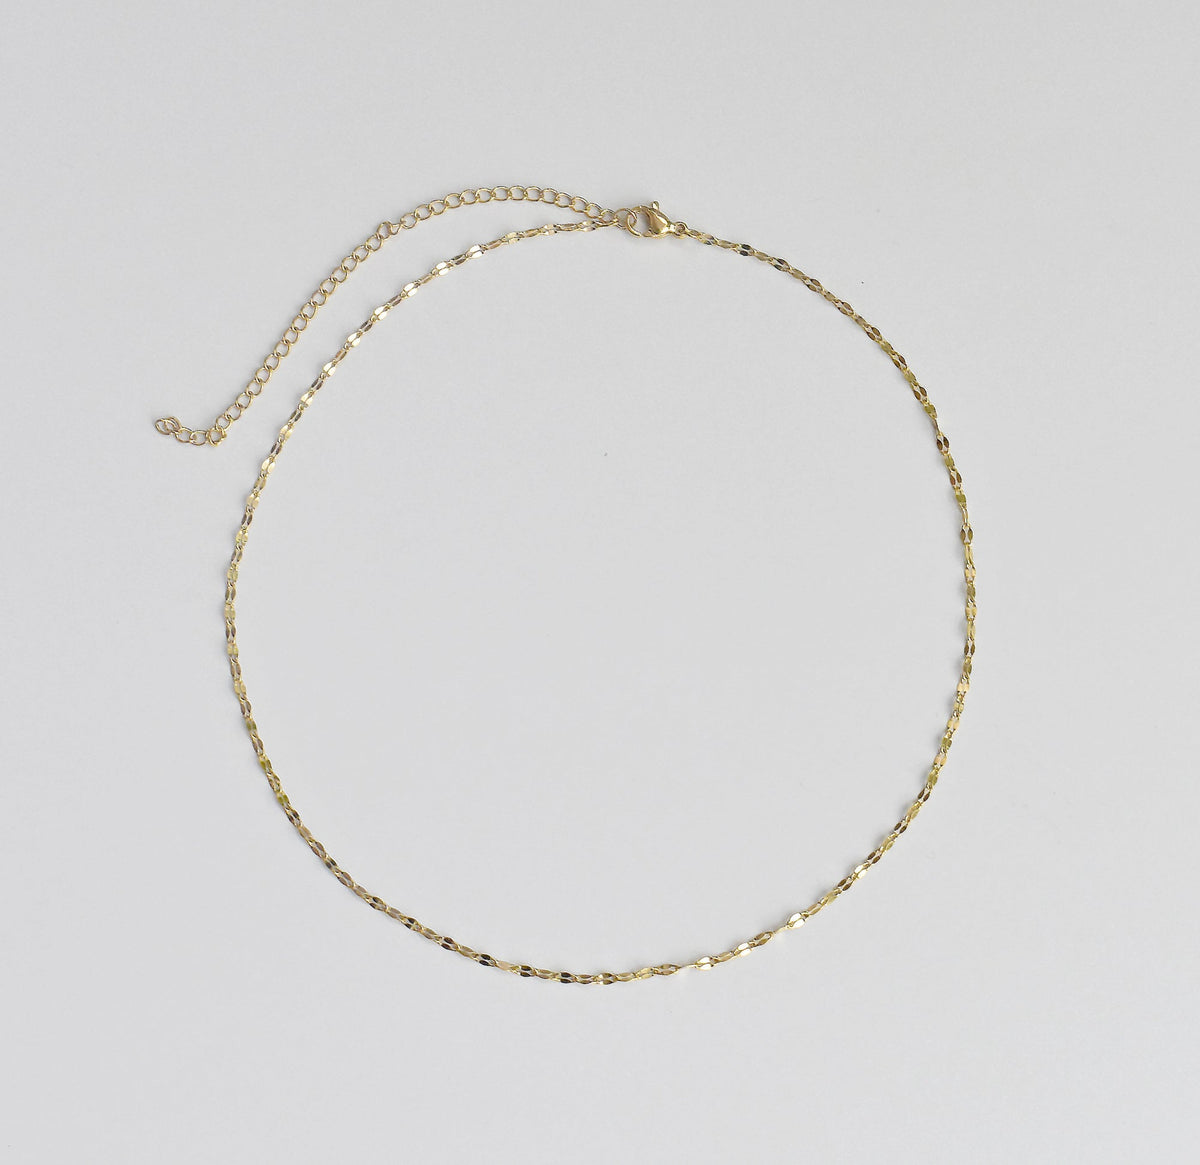 DAINTY GOLD LACE CHAIN NECKLACE WATERPROOF